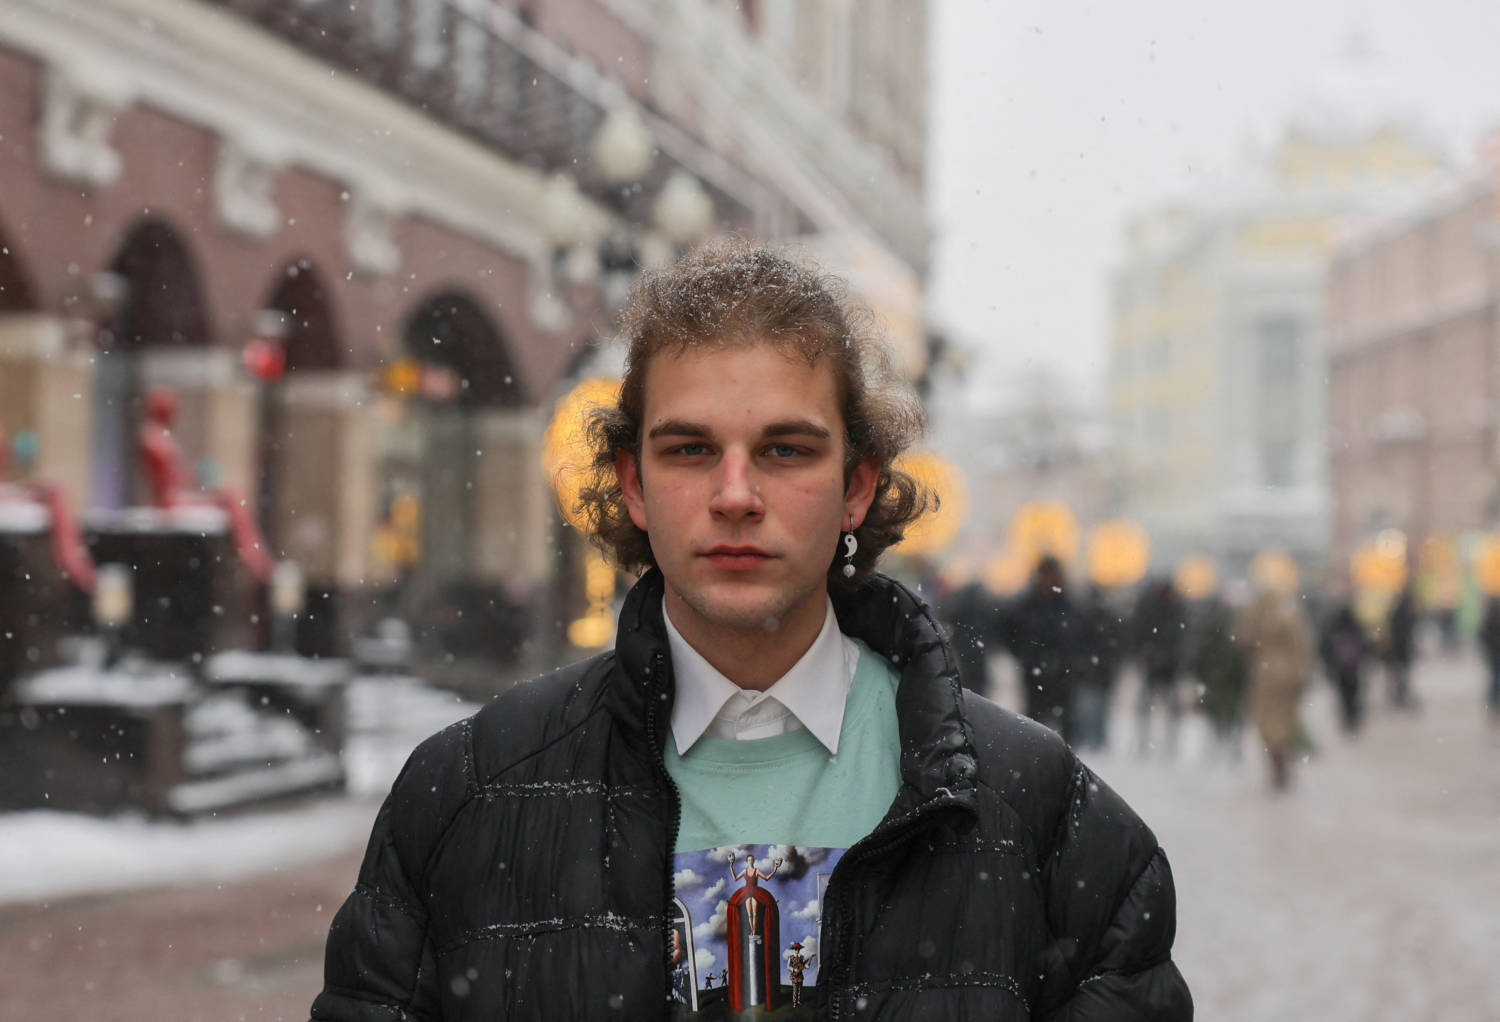 Egor Lvov, A University Student And Political Activist, Poses For A Picture In Moscow